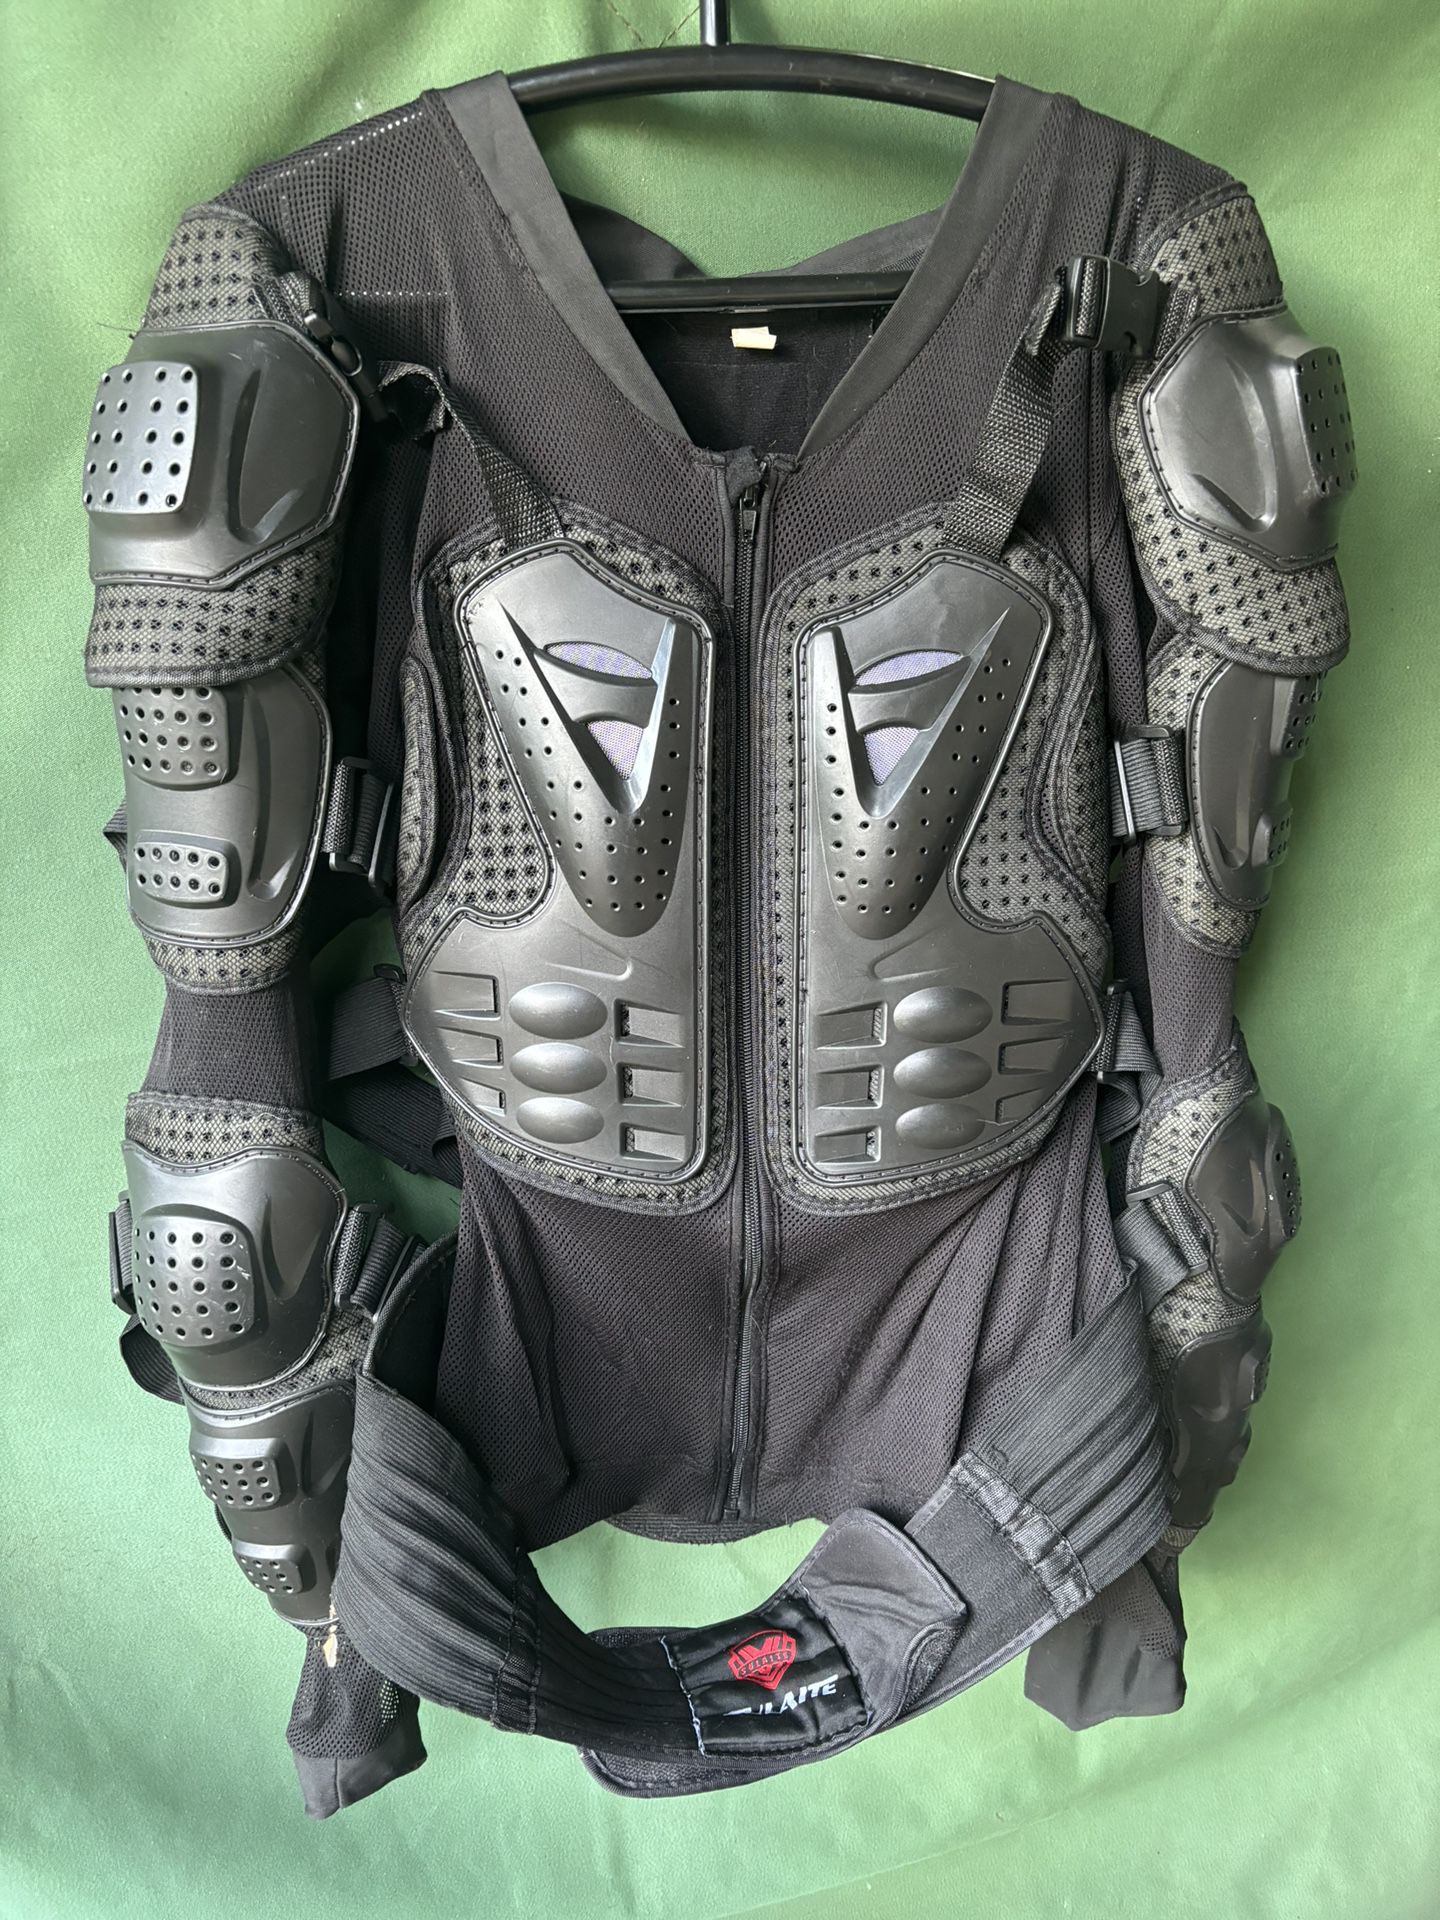 SULAITE Professional Motorcycle Jacket Motocross Full Body Armor Protection Gear